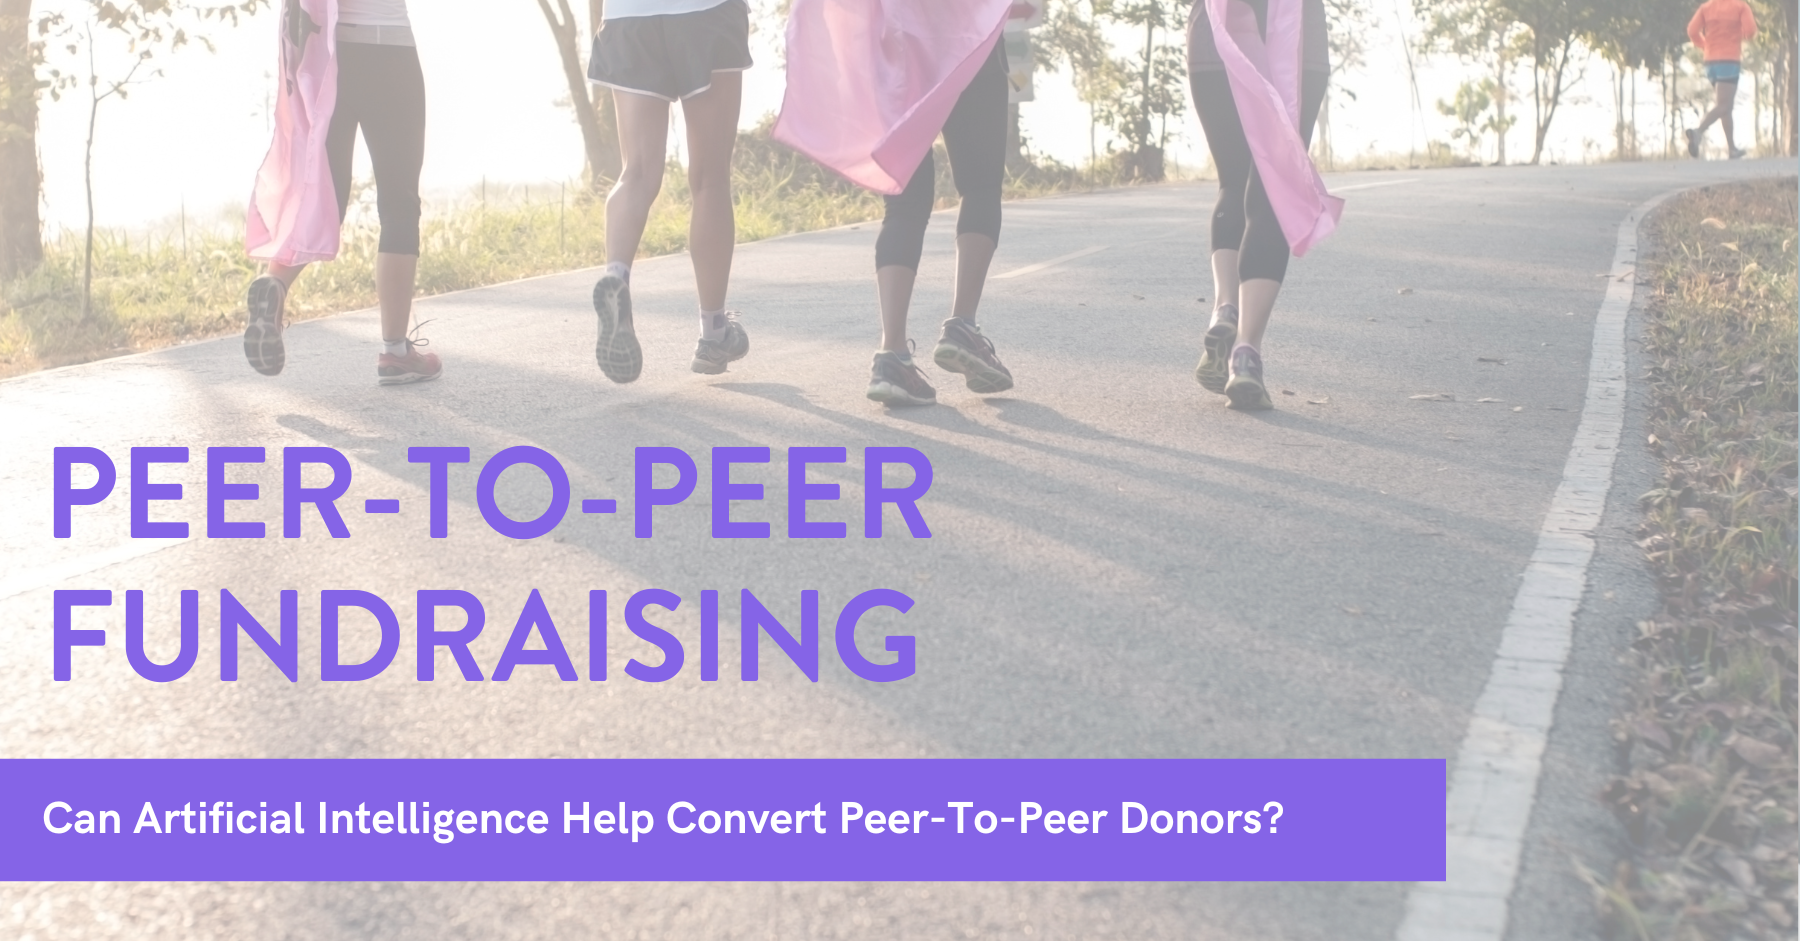 >Can Artificial Intelligence Solve the Gaps in Peer-To-Peer Fundraising?